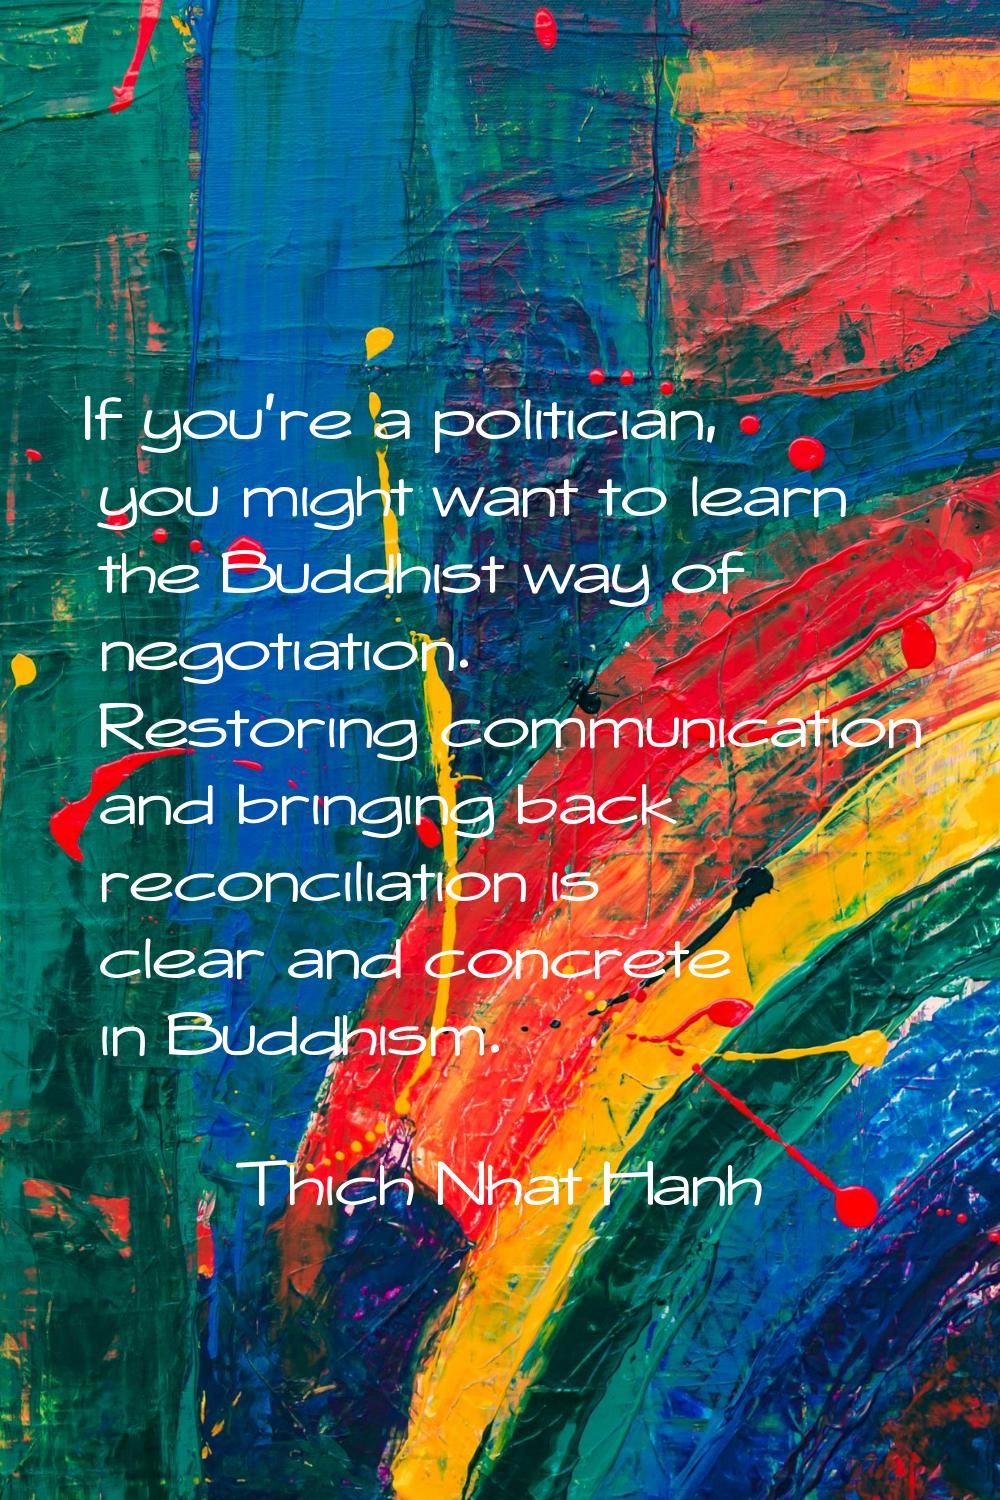 If you're a politician, you might want to learn the Buddhist way of negotiation. Restoring communic